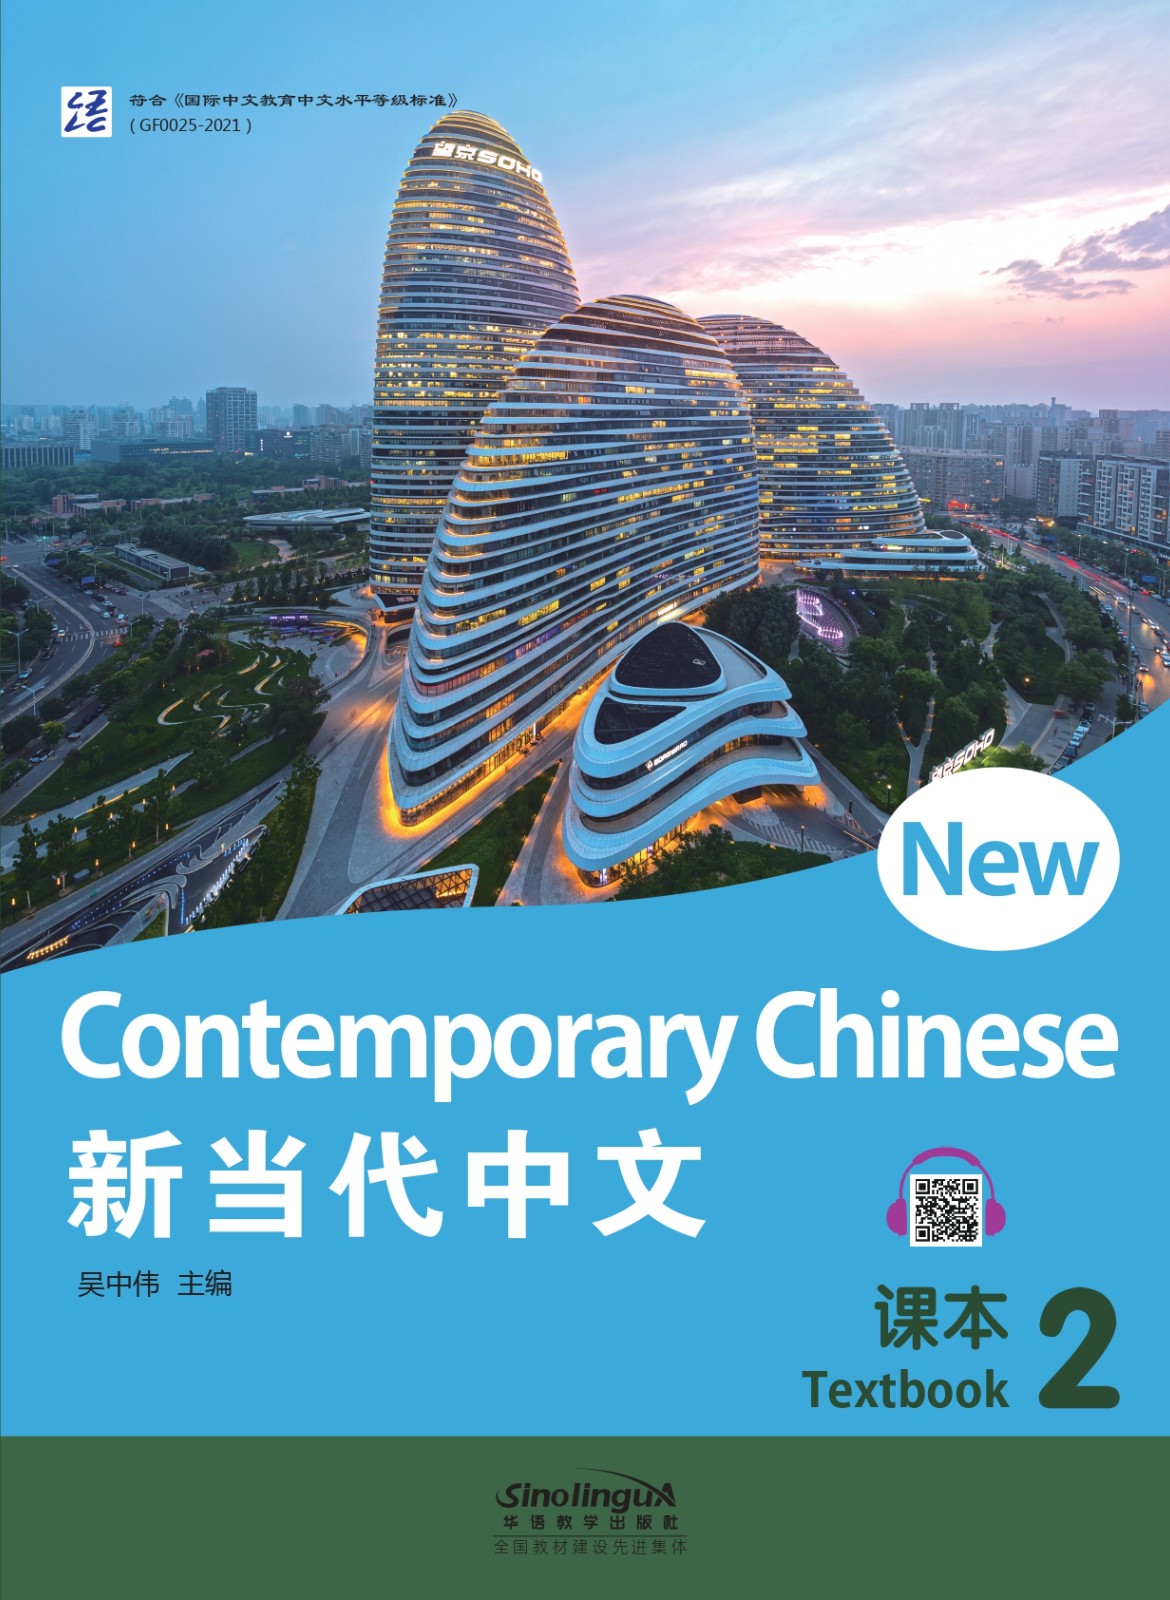 New Contemporary Chinese--Textbook 2